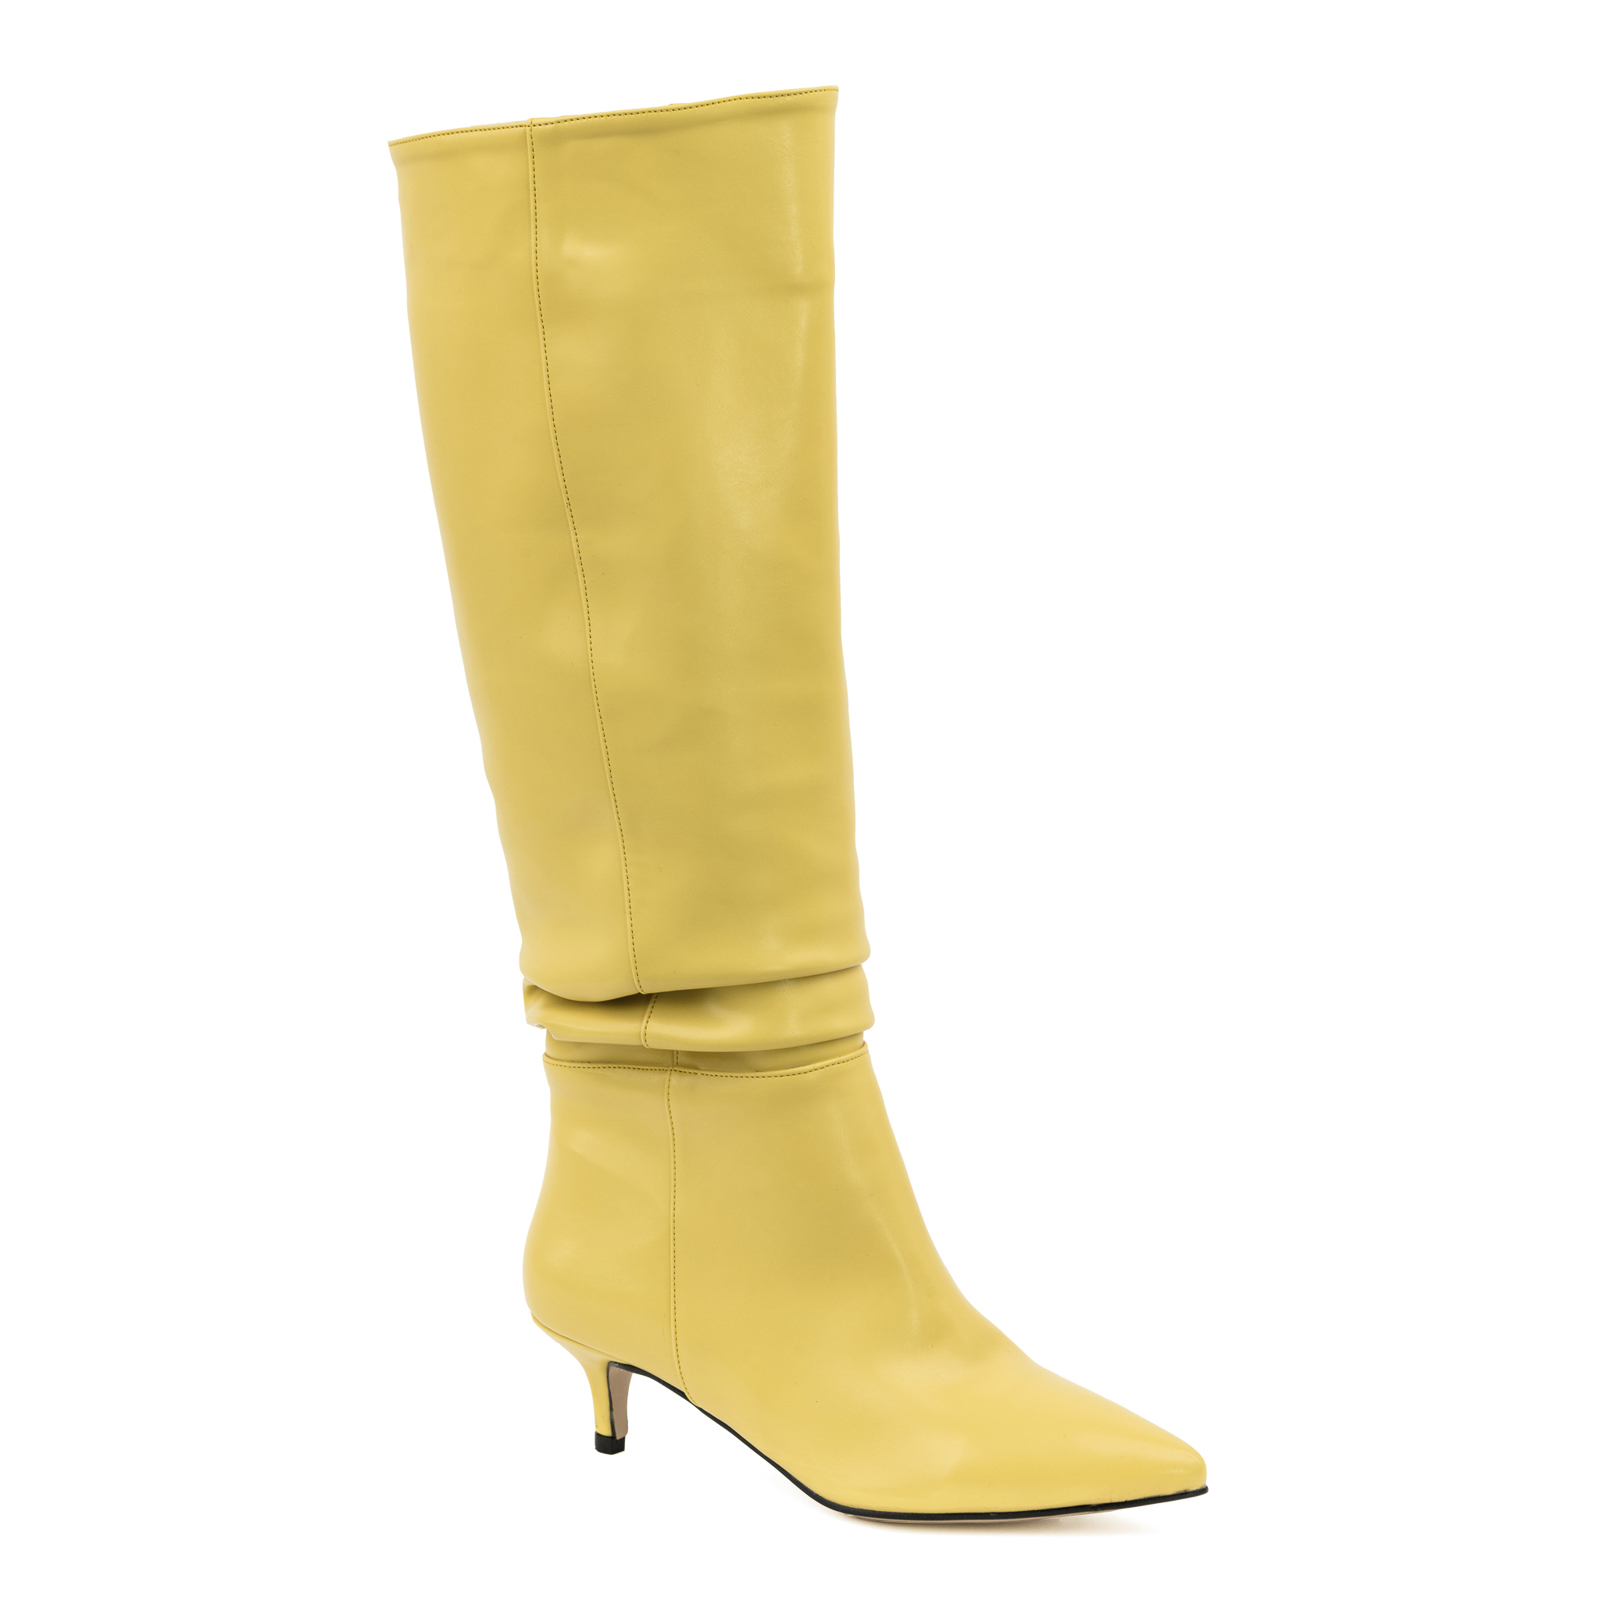 SPIKE WRINKLED BOOTS THIN HEEL - YELLOW